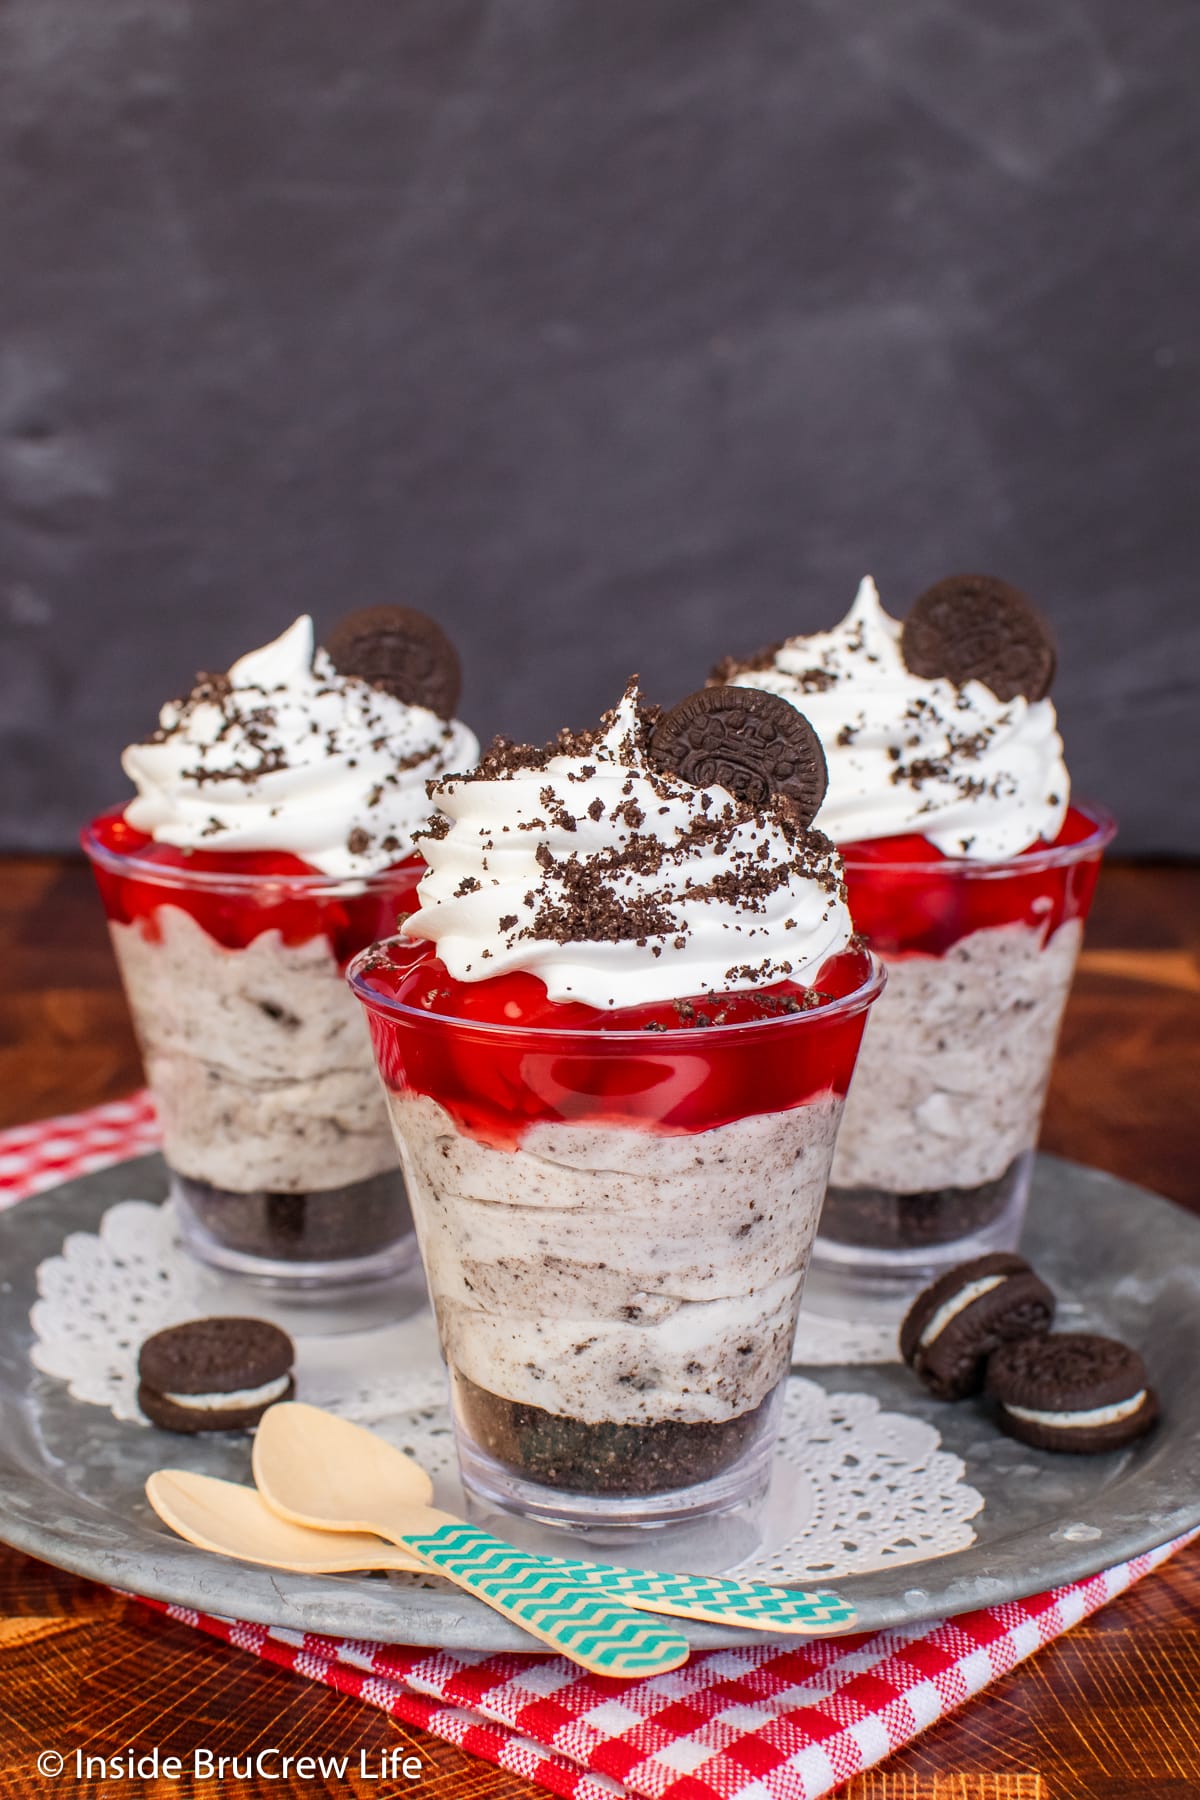 Three Oreo parfaits topped with cherry pie filling.